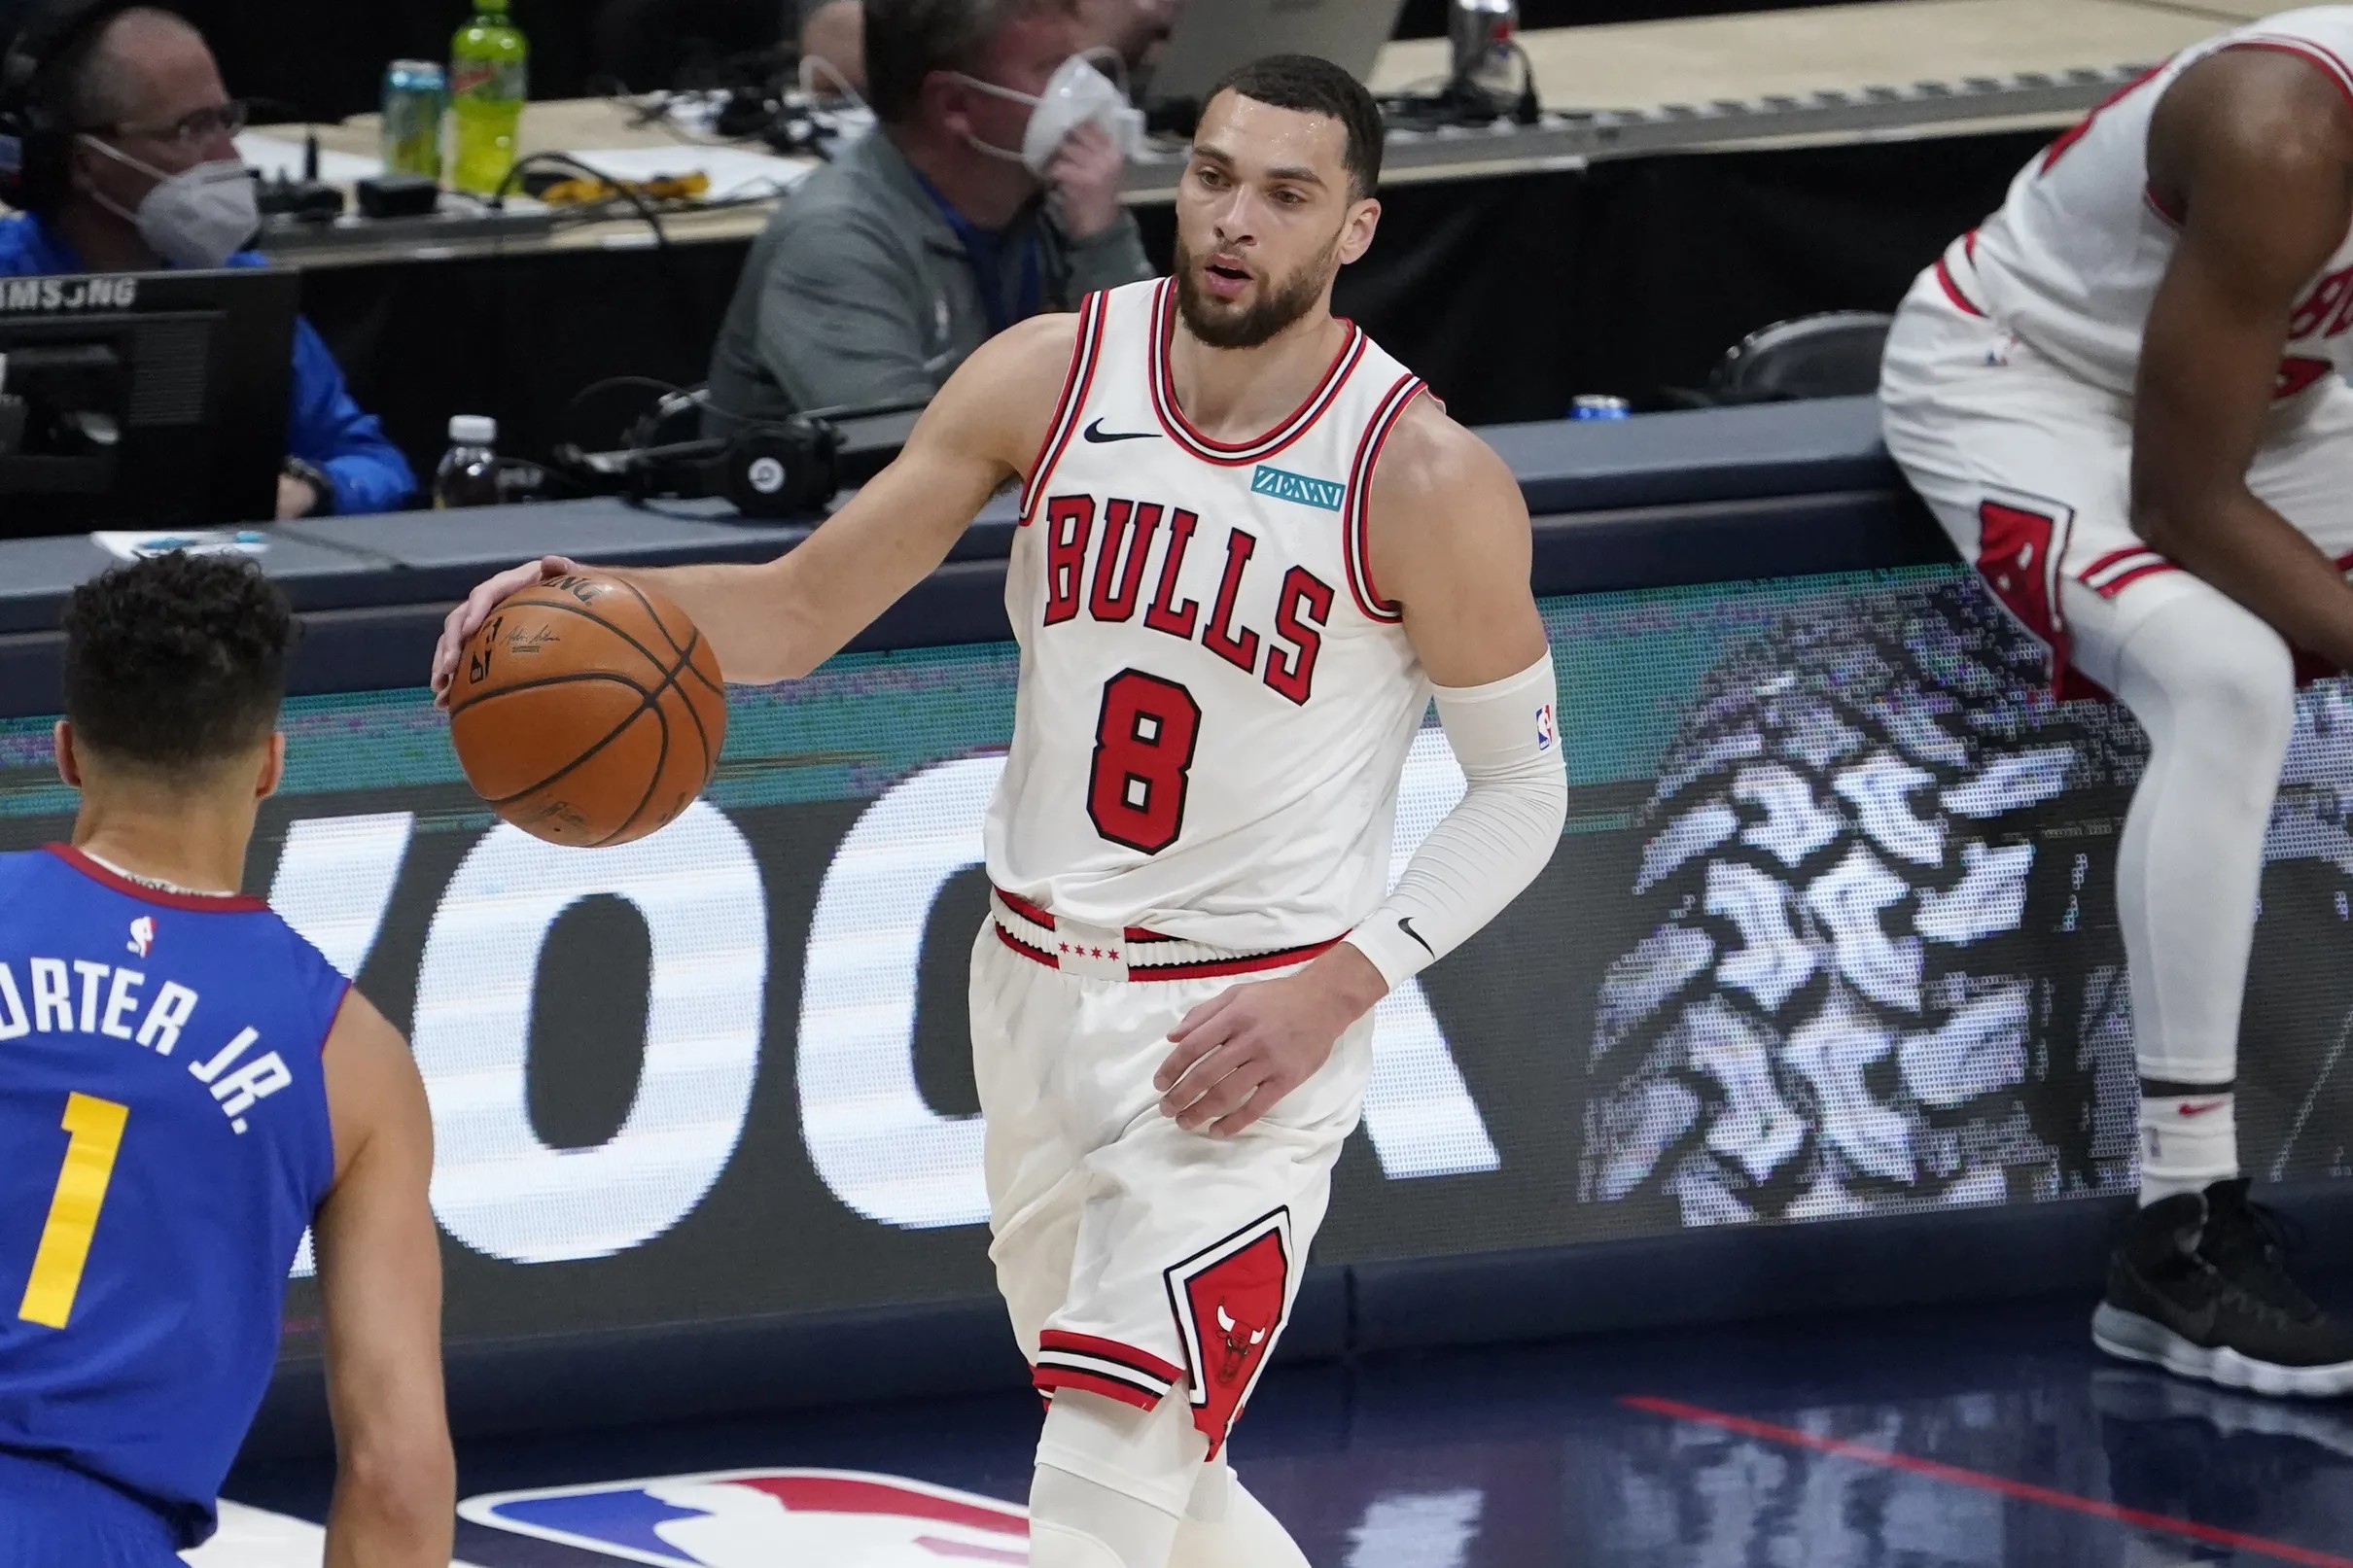 Bulls vs. Nuggets final score Chicago loses 131127 in OT after